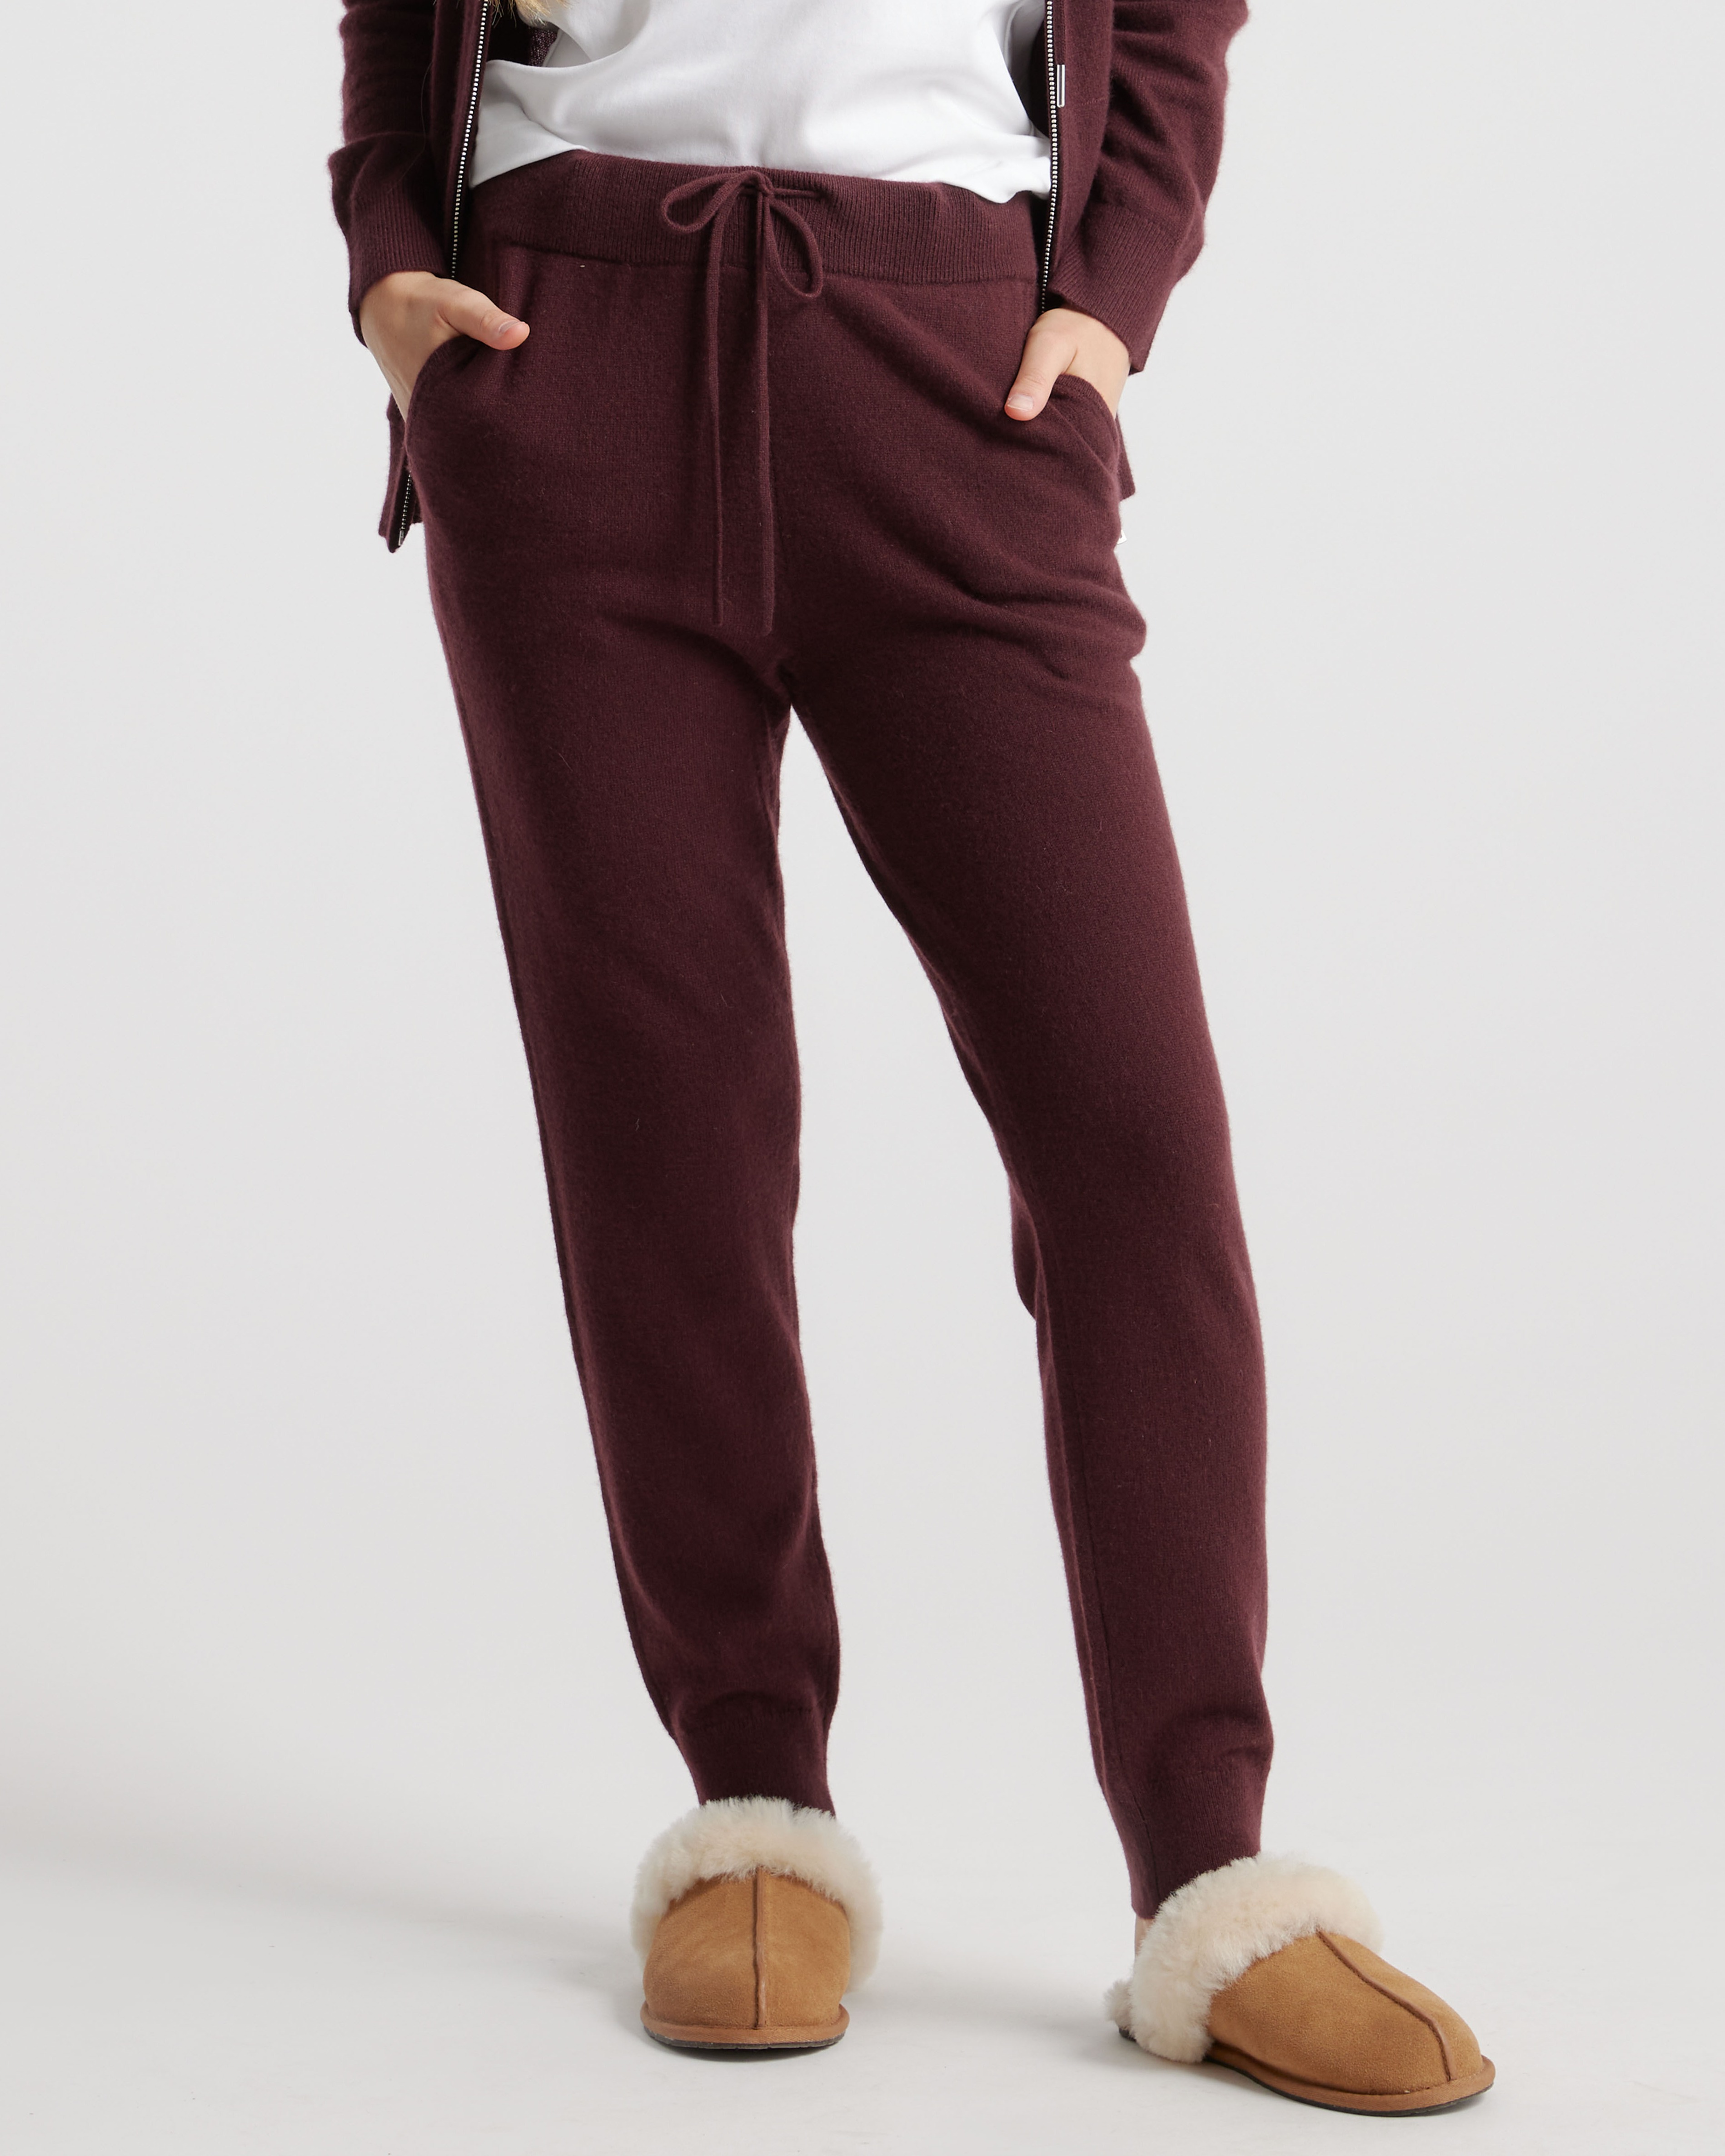 31 Loungewear Items Comfy Enough For A Long Flight